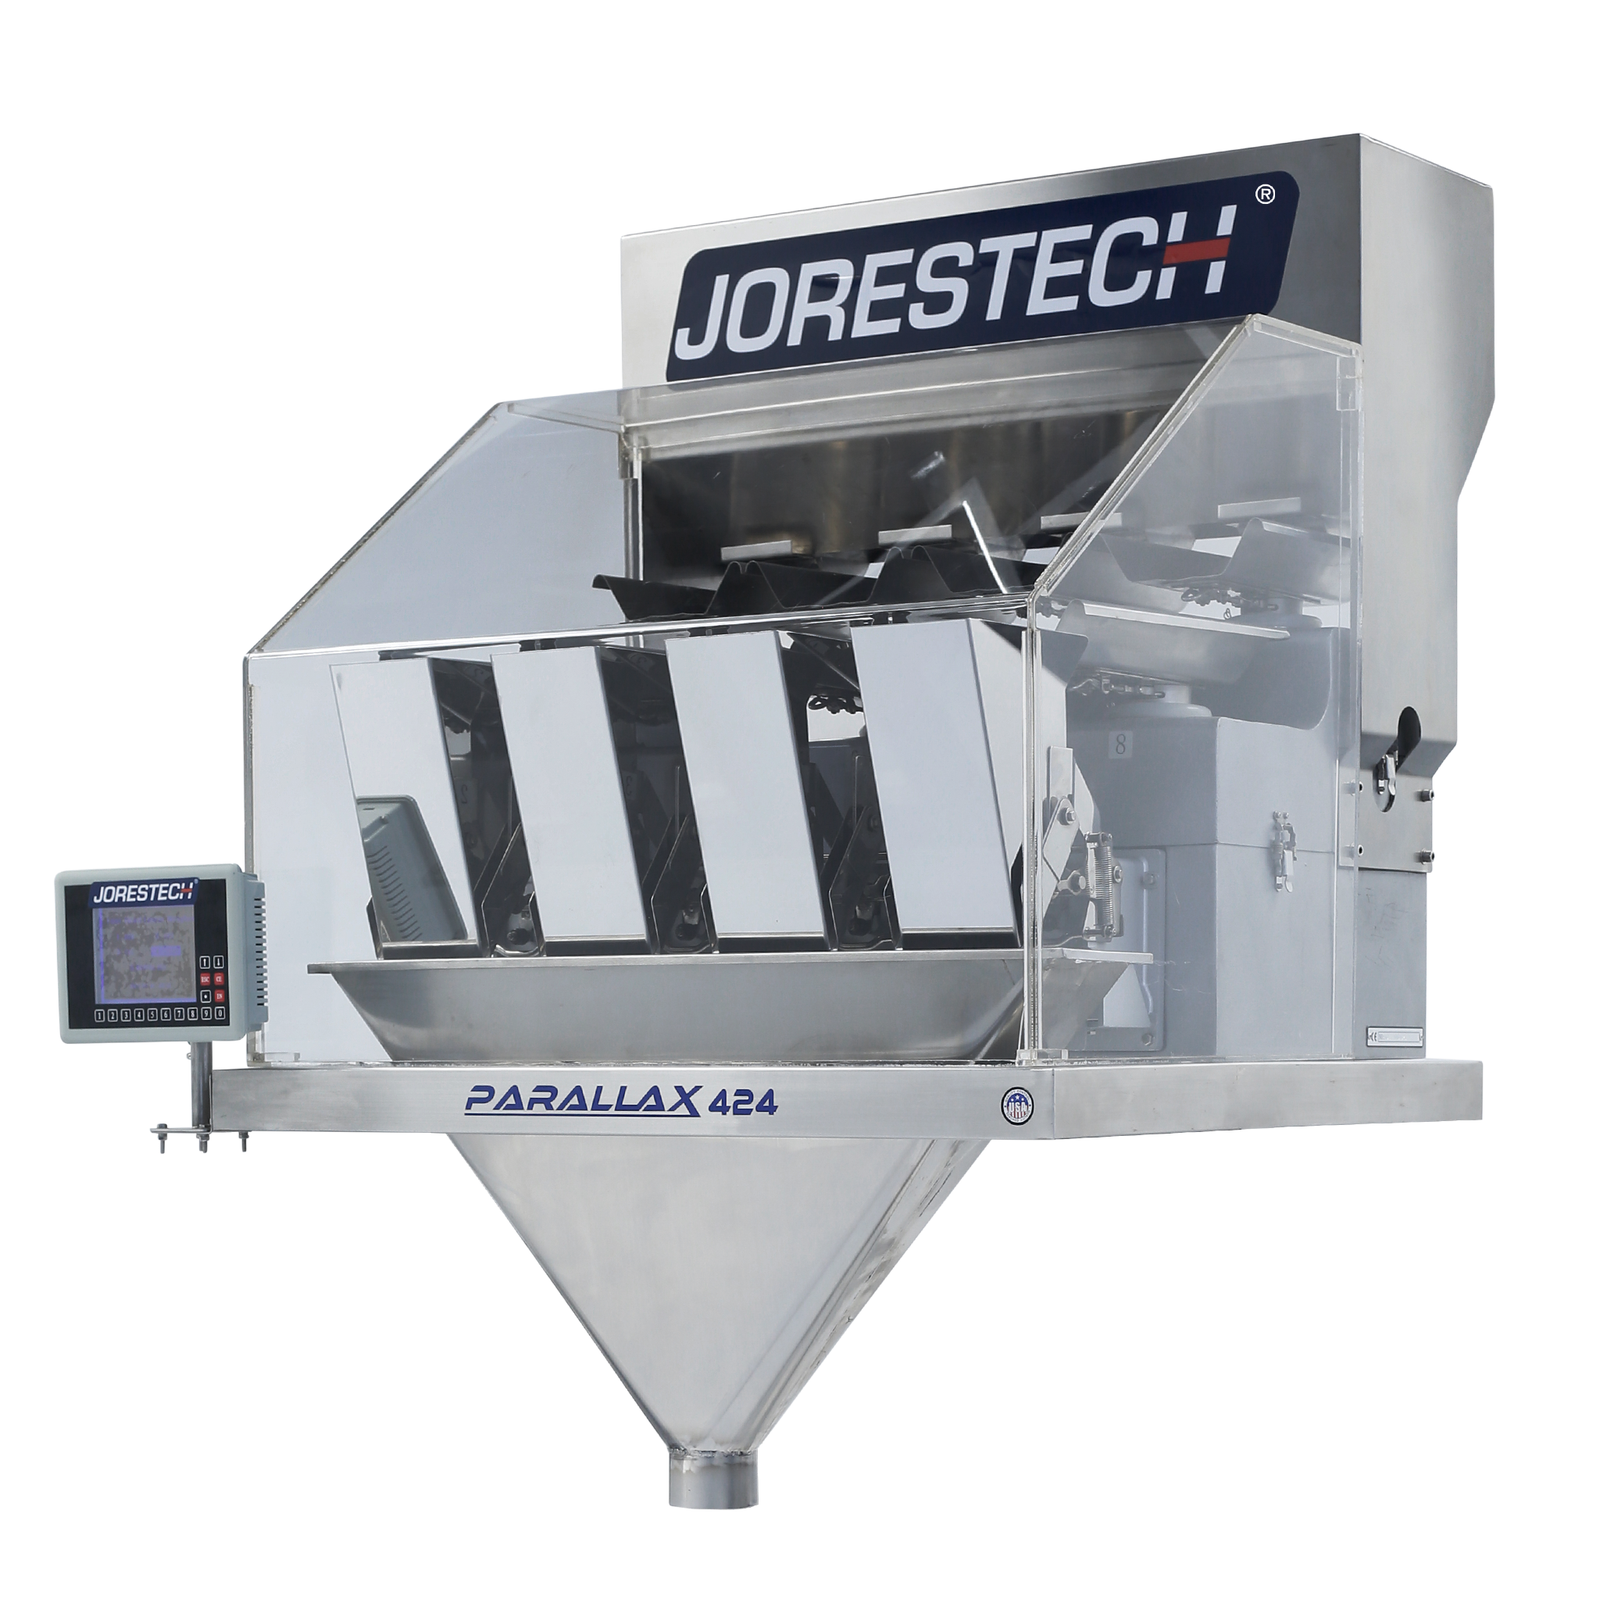 The JORES TECHNOLOGIES® stainless steel 4 head linear weighing machine for packaging quantities of bulk and free-flowing products shown in a diagonal view